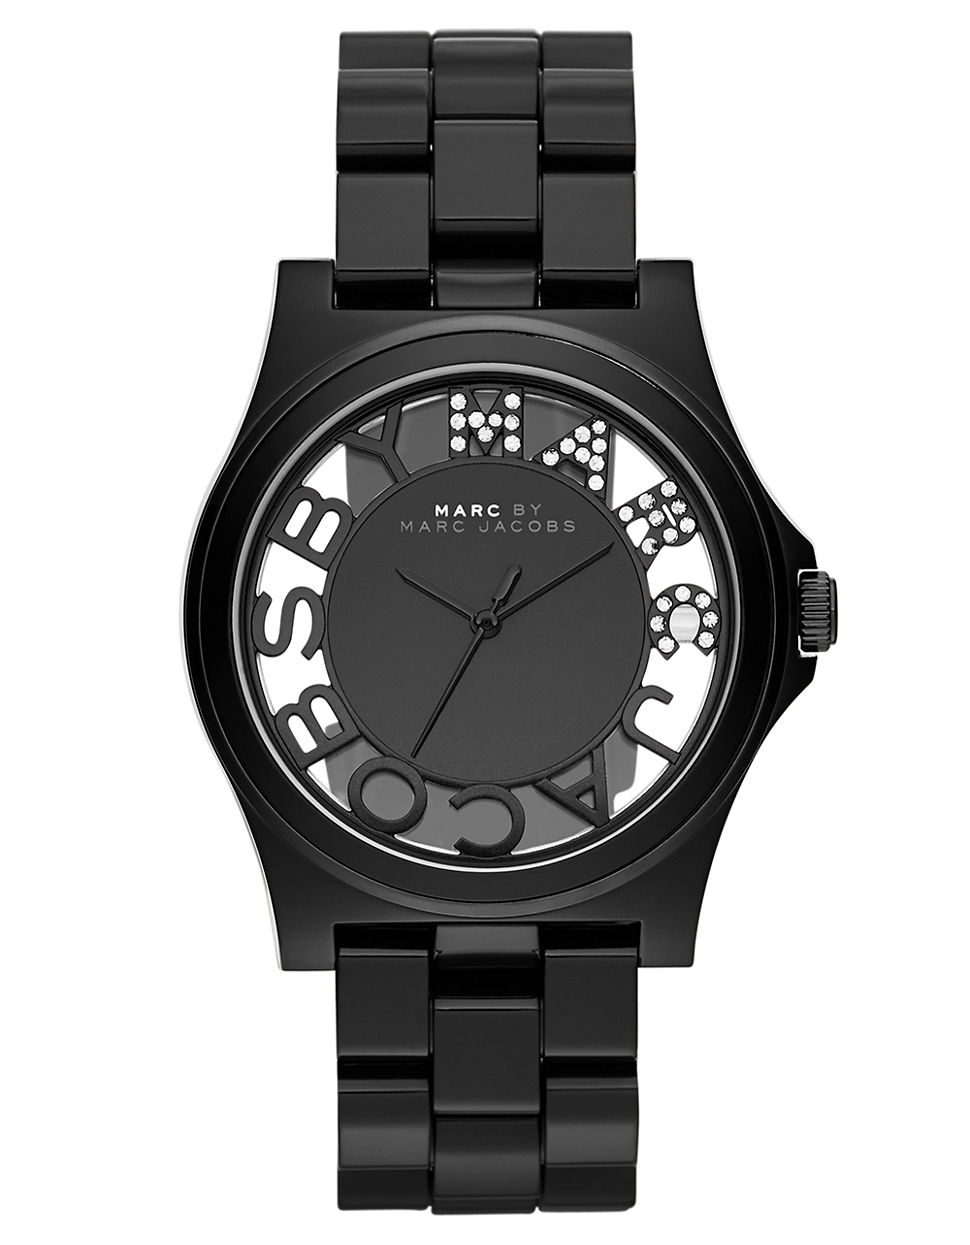 Lyst - Marc by marc jacobs Ladies Crystallized Henry Skeleton Watch in ...